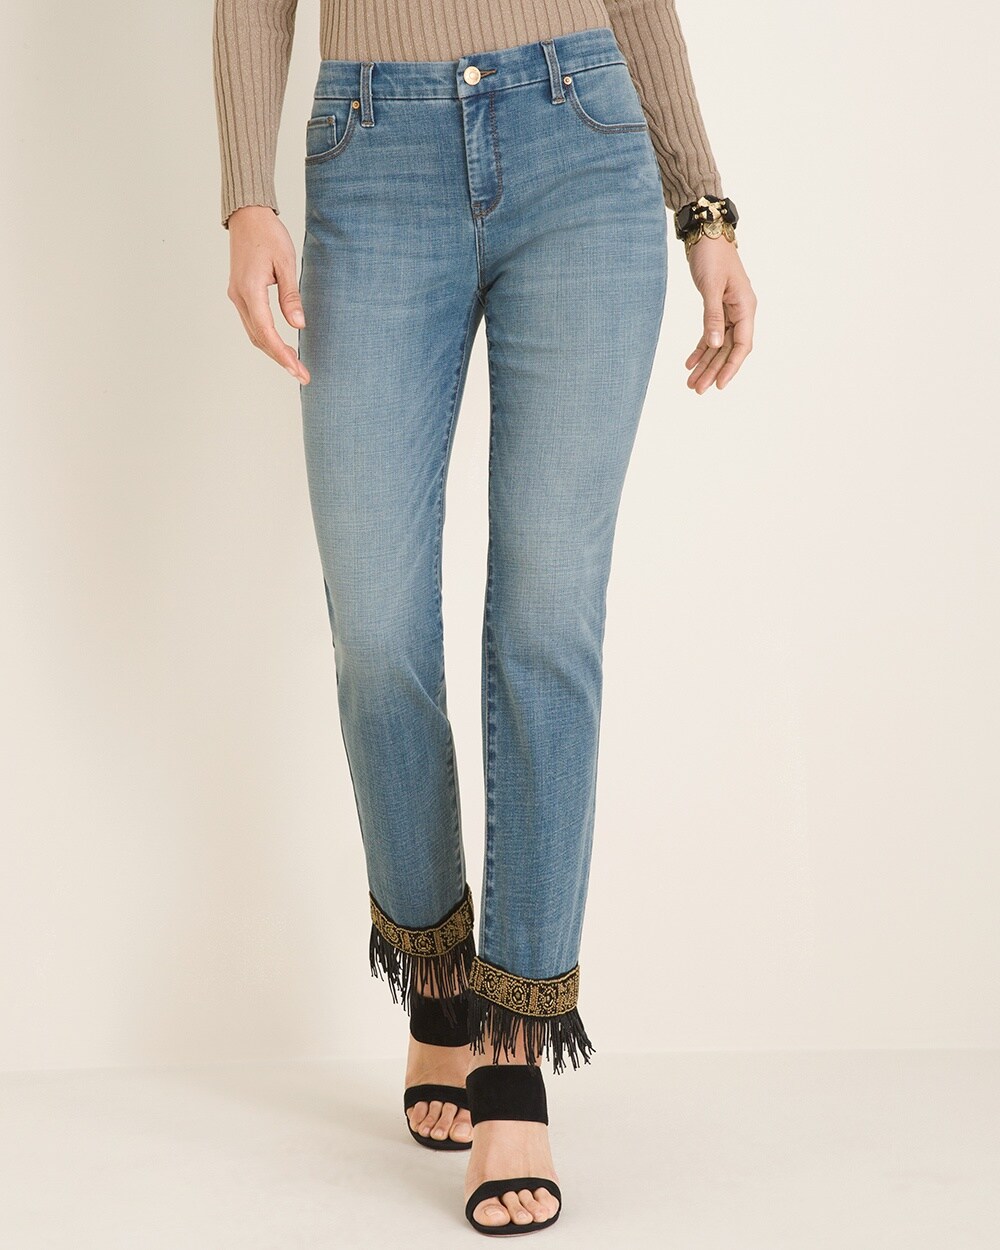 So Slimming Beaded Fringe Cuff Girlfriend Ankle Jeans